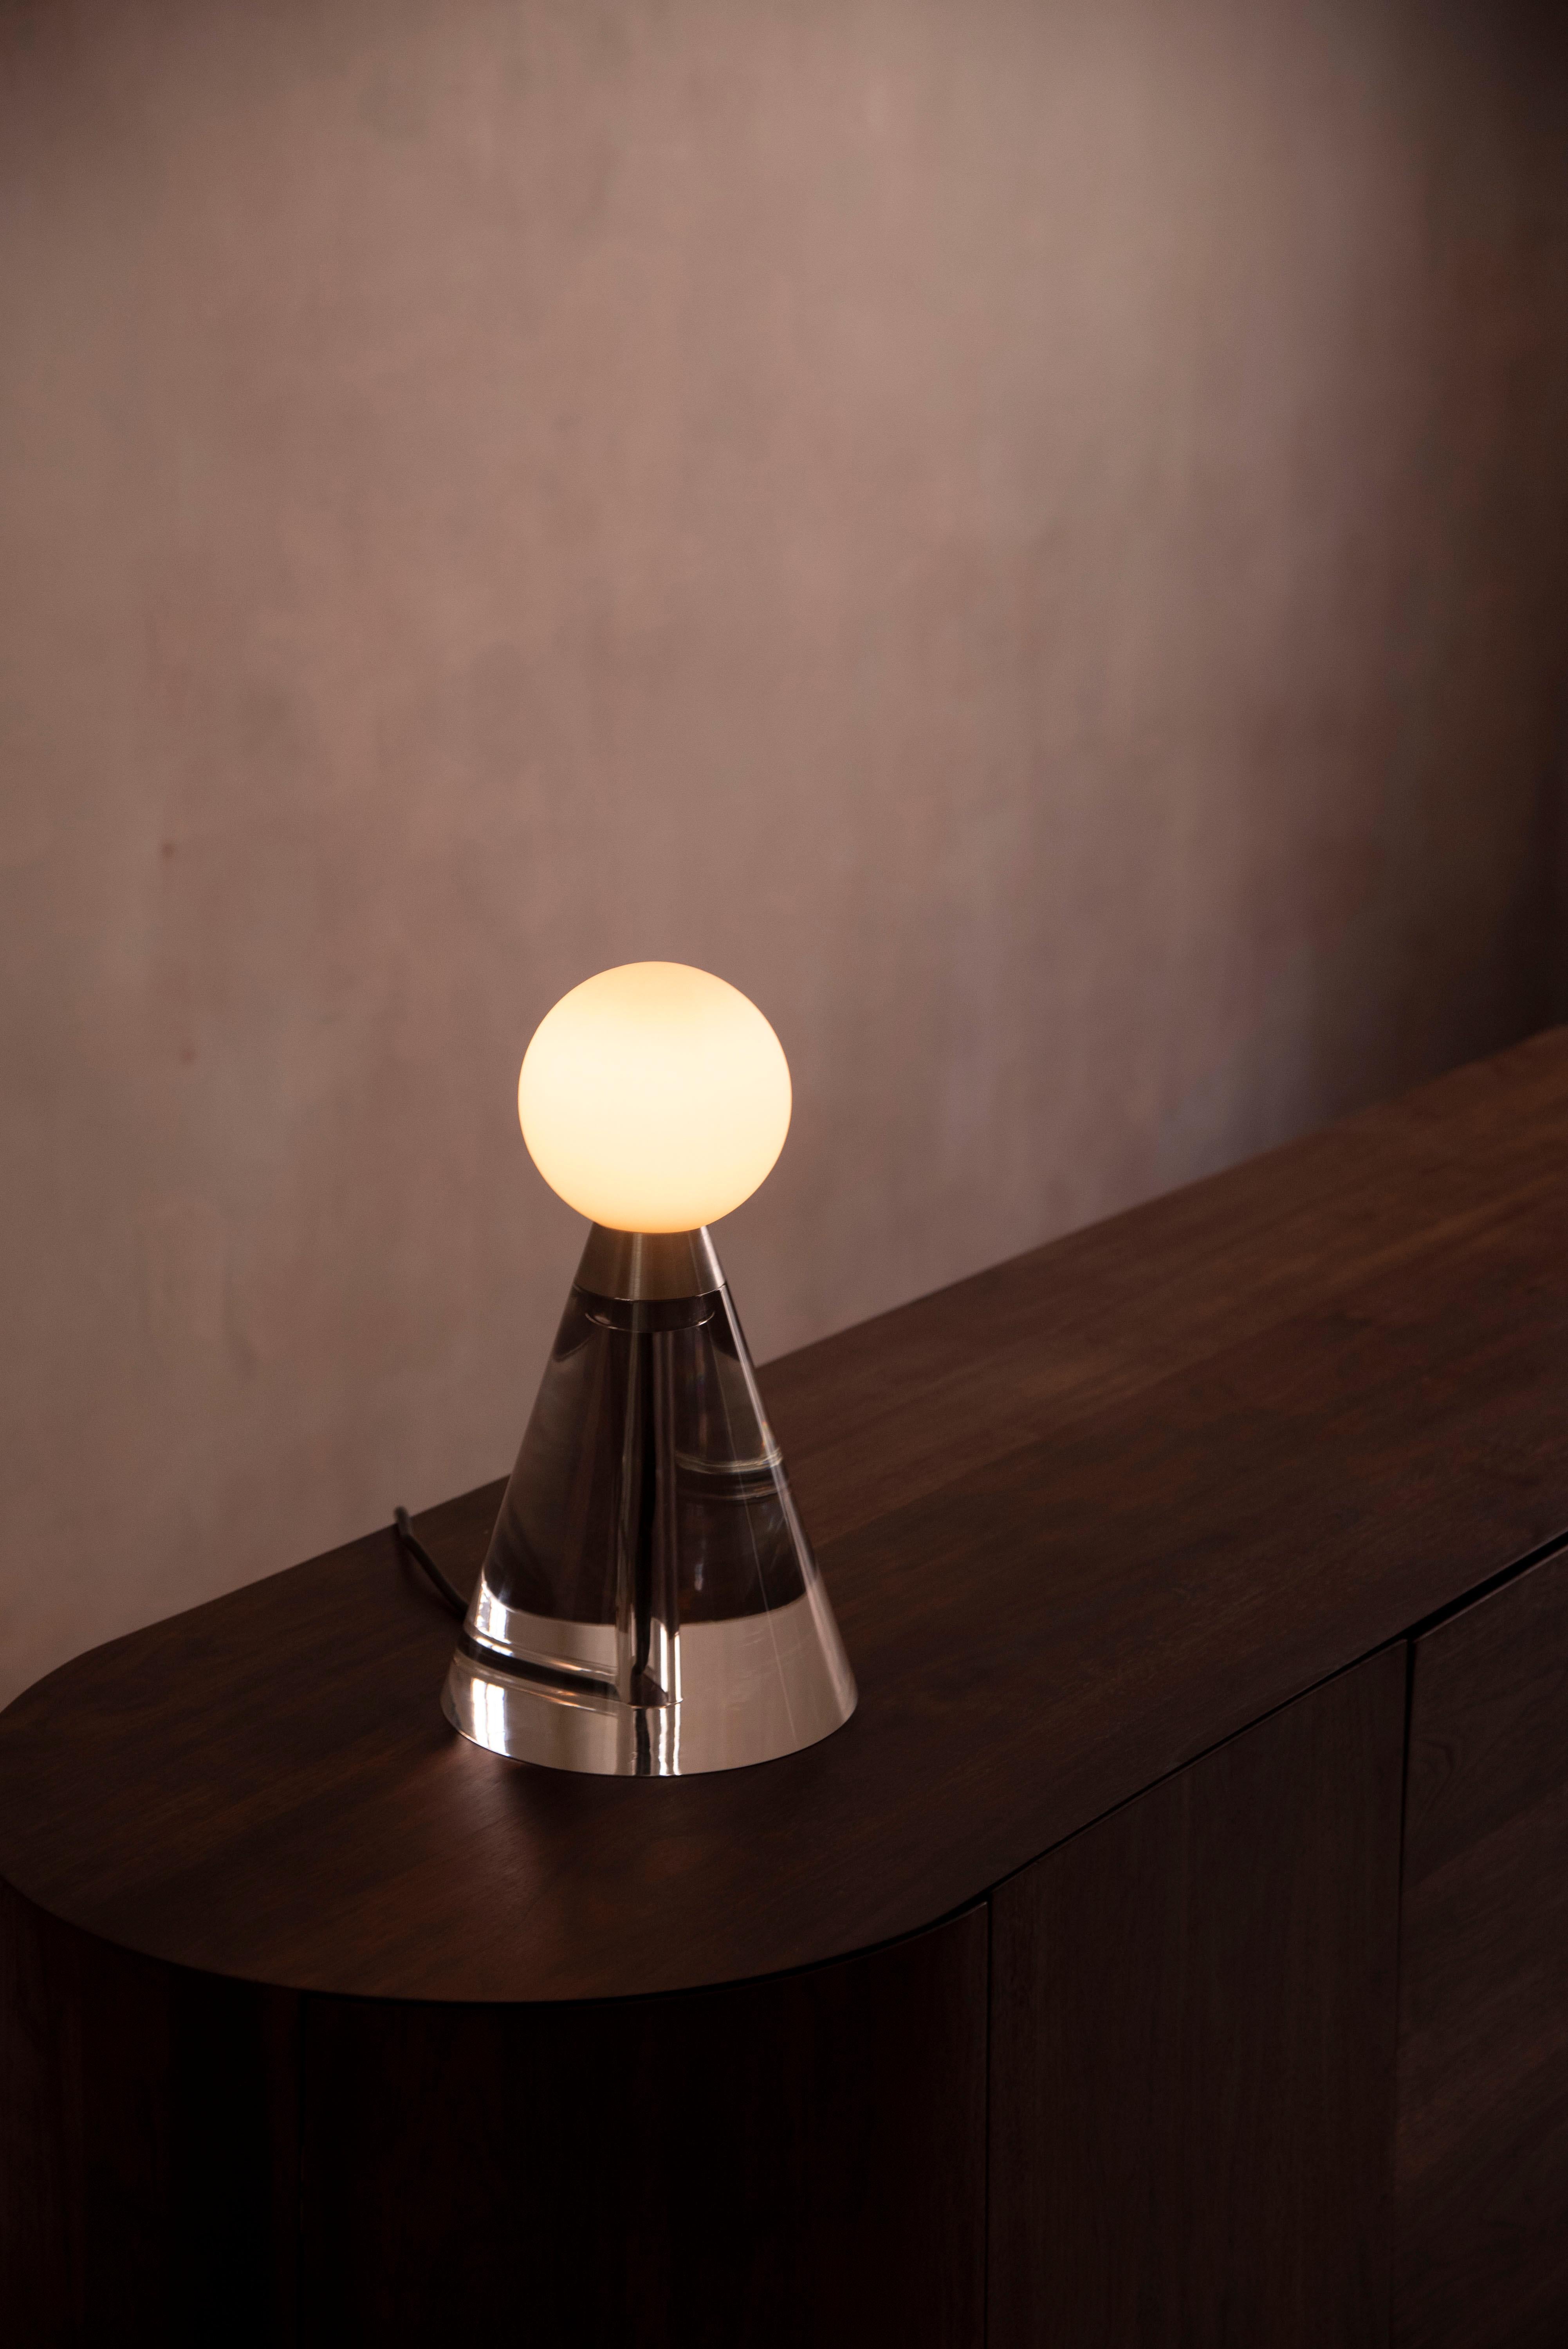 Mercurio is a sculptural table lamp characterized by its balanced geometric form and
simplistic appearance. 

The elements of Mercurio form a connection between humans
and our minimal understanding of the universe. The base references totemic